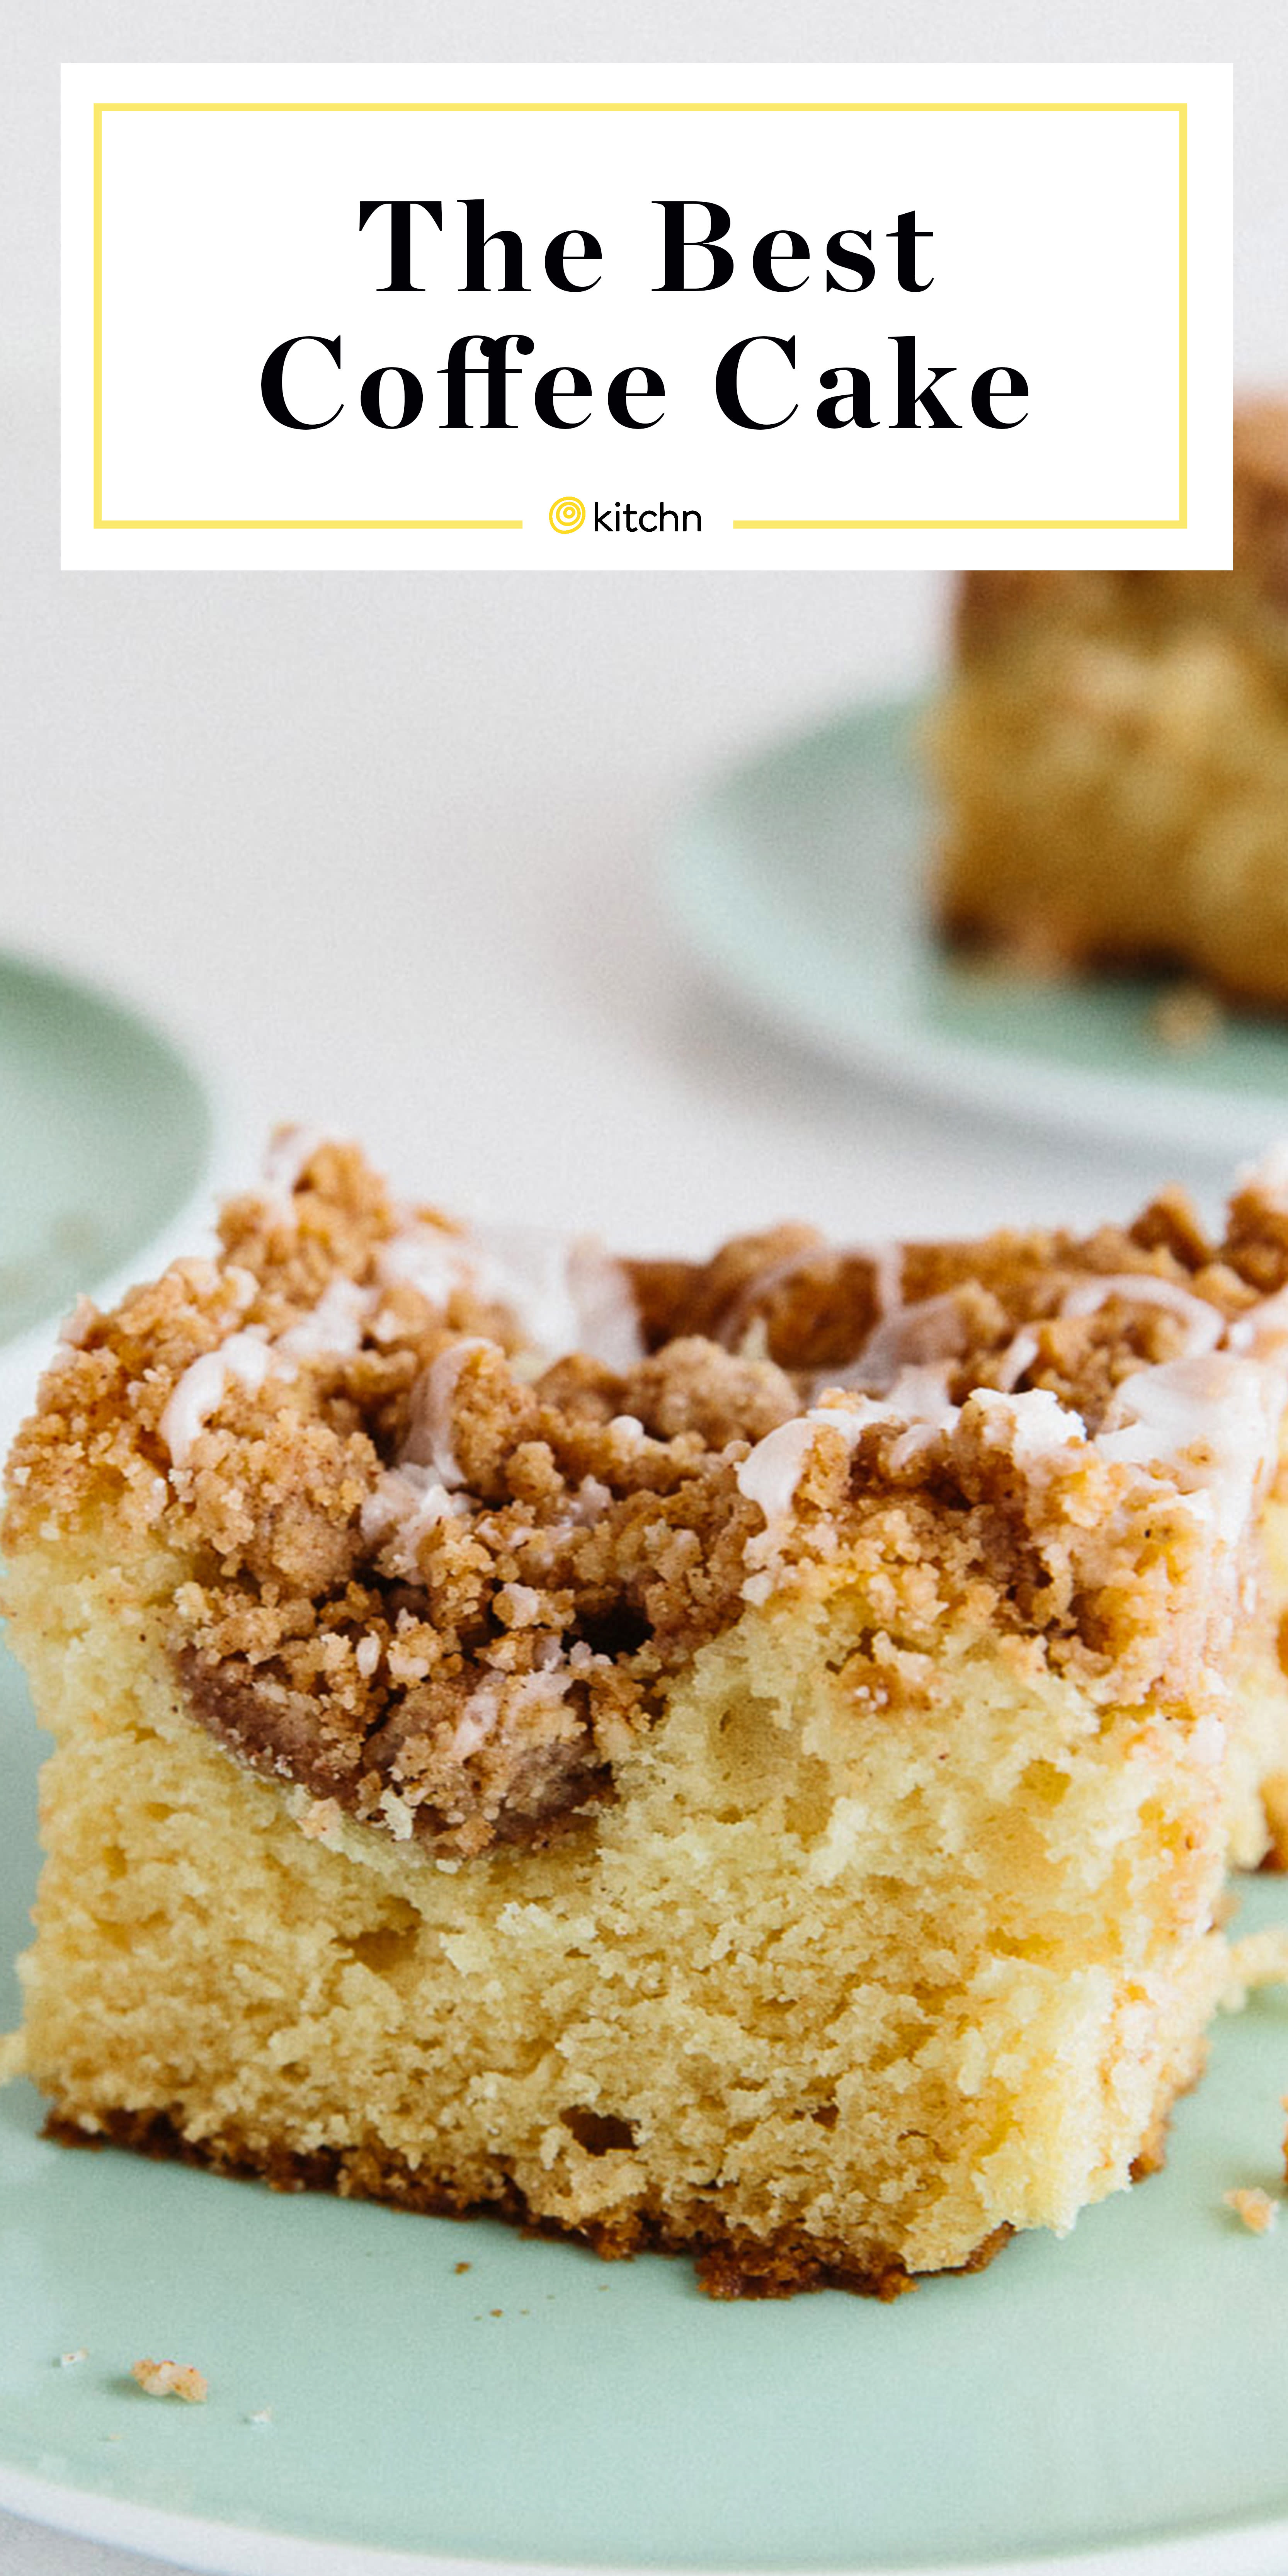 Home Made Coffee Cake In a Pan|Even w/o Oven ! 🔥💚 Easy to Cook. #fy ... |  TikTok